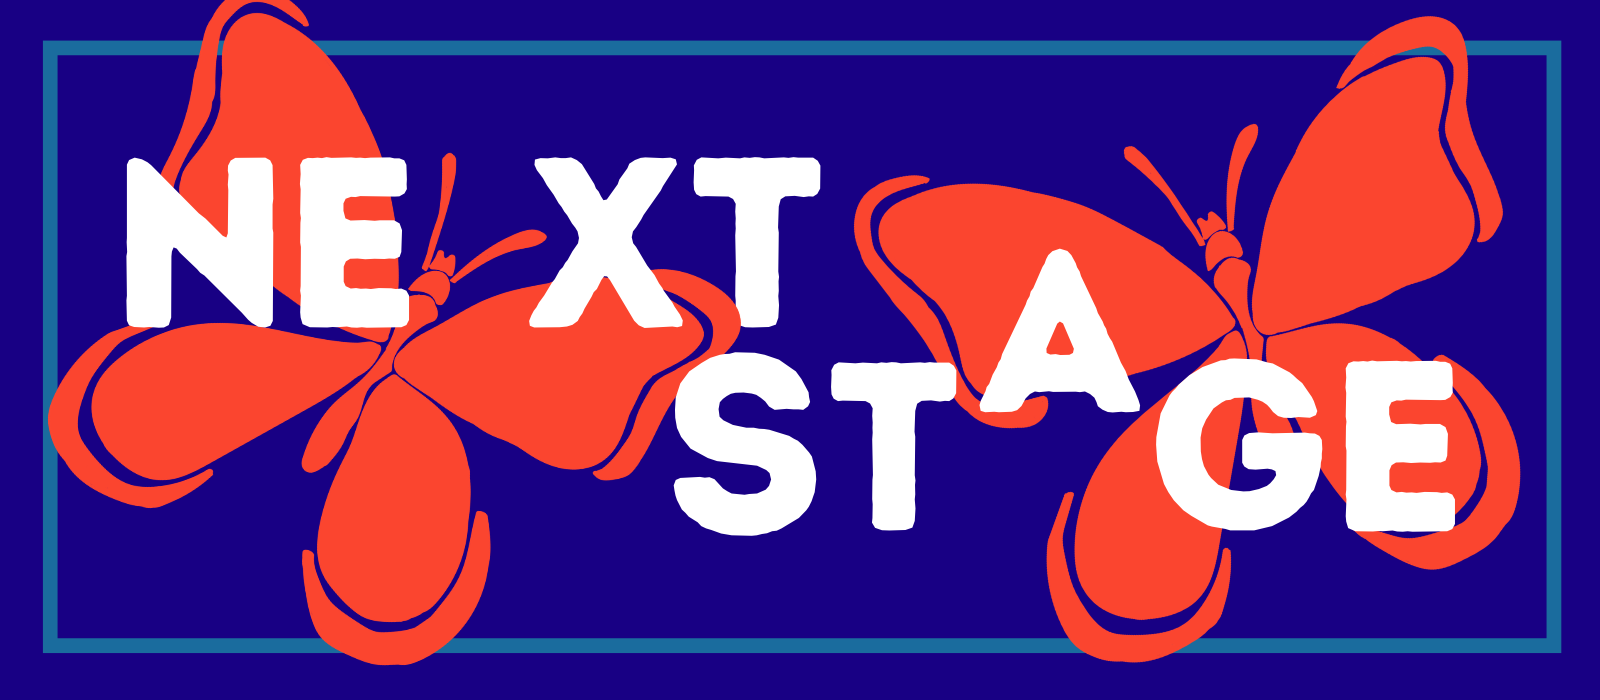 "Toronto Fringe presents Next Stage" on a blue background with orange butterflies 